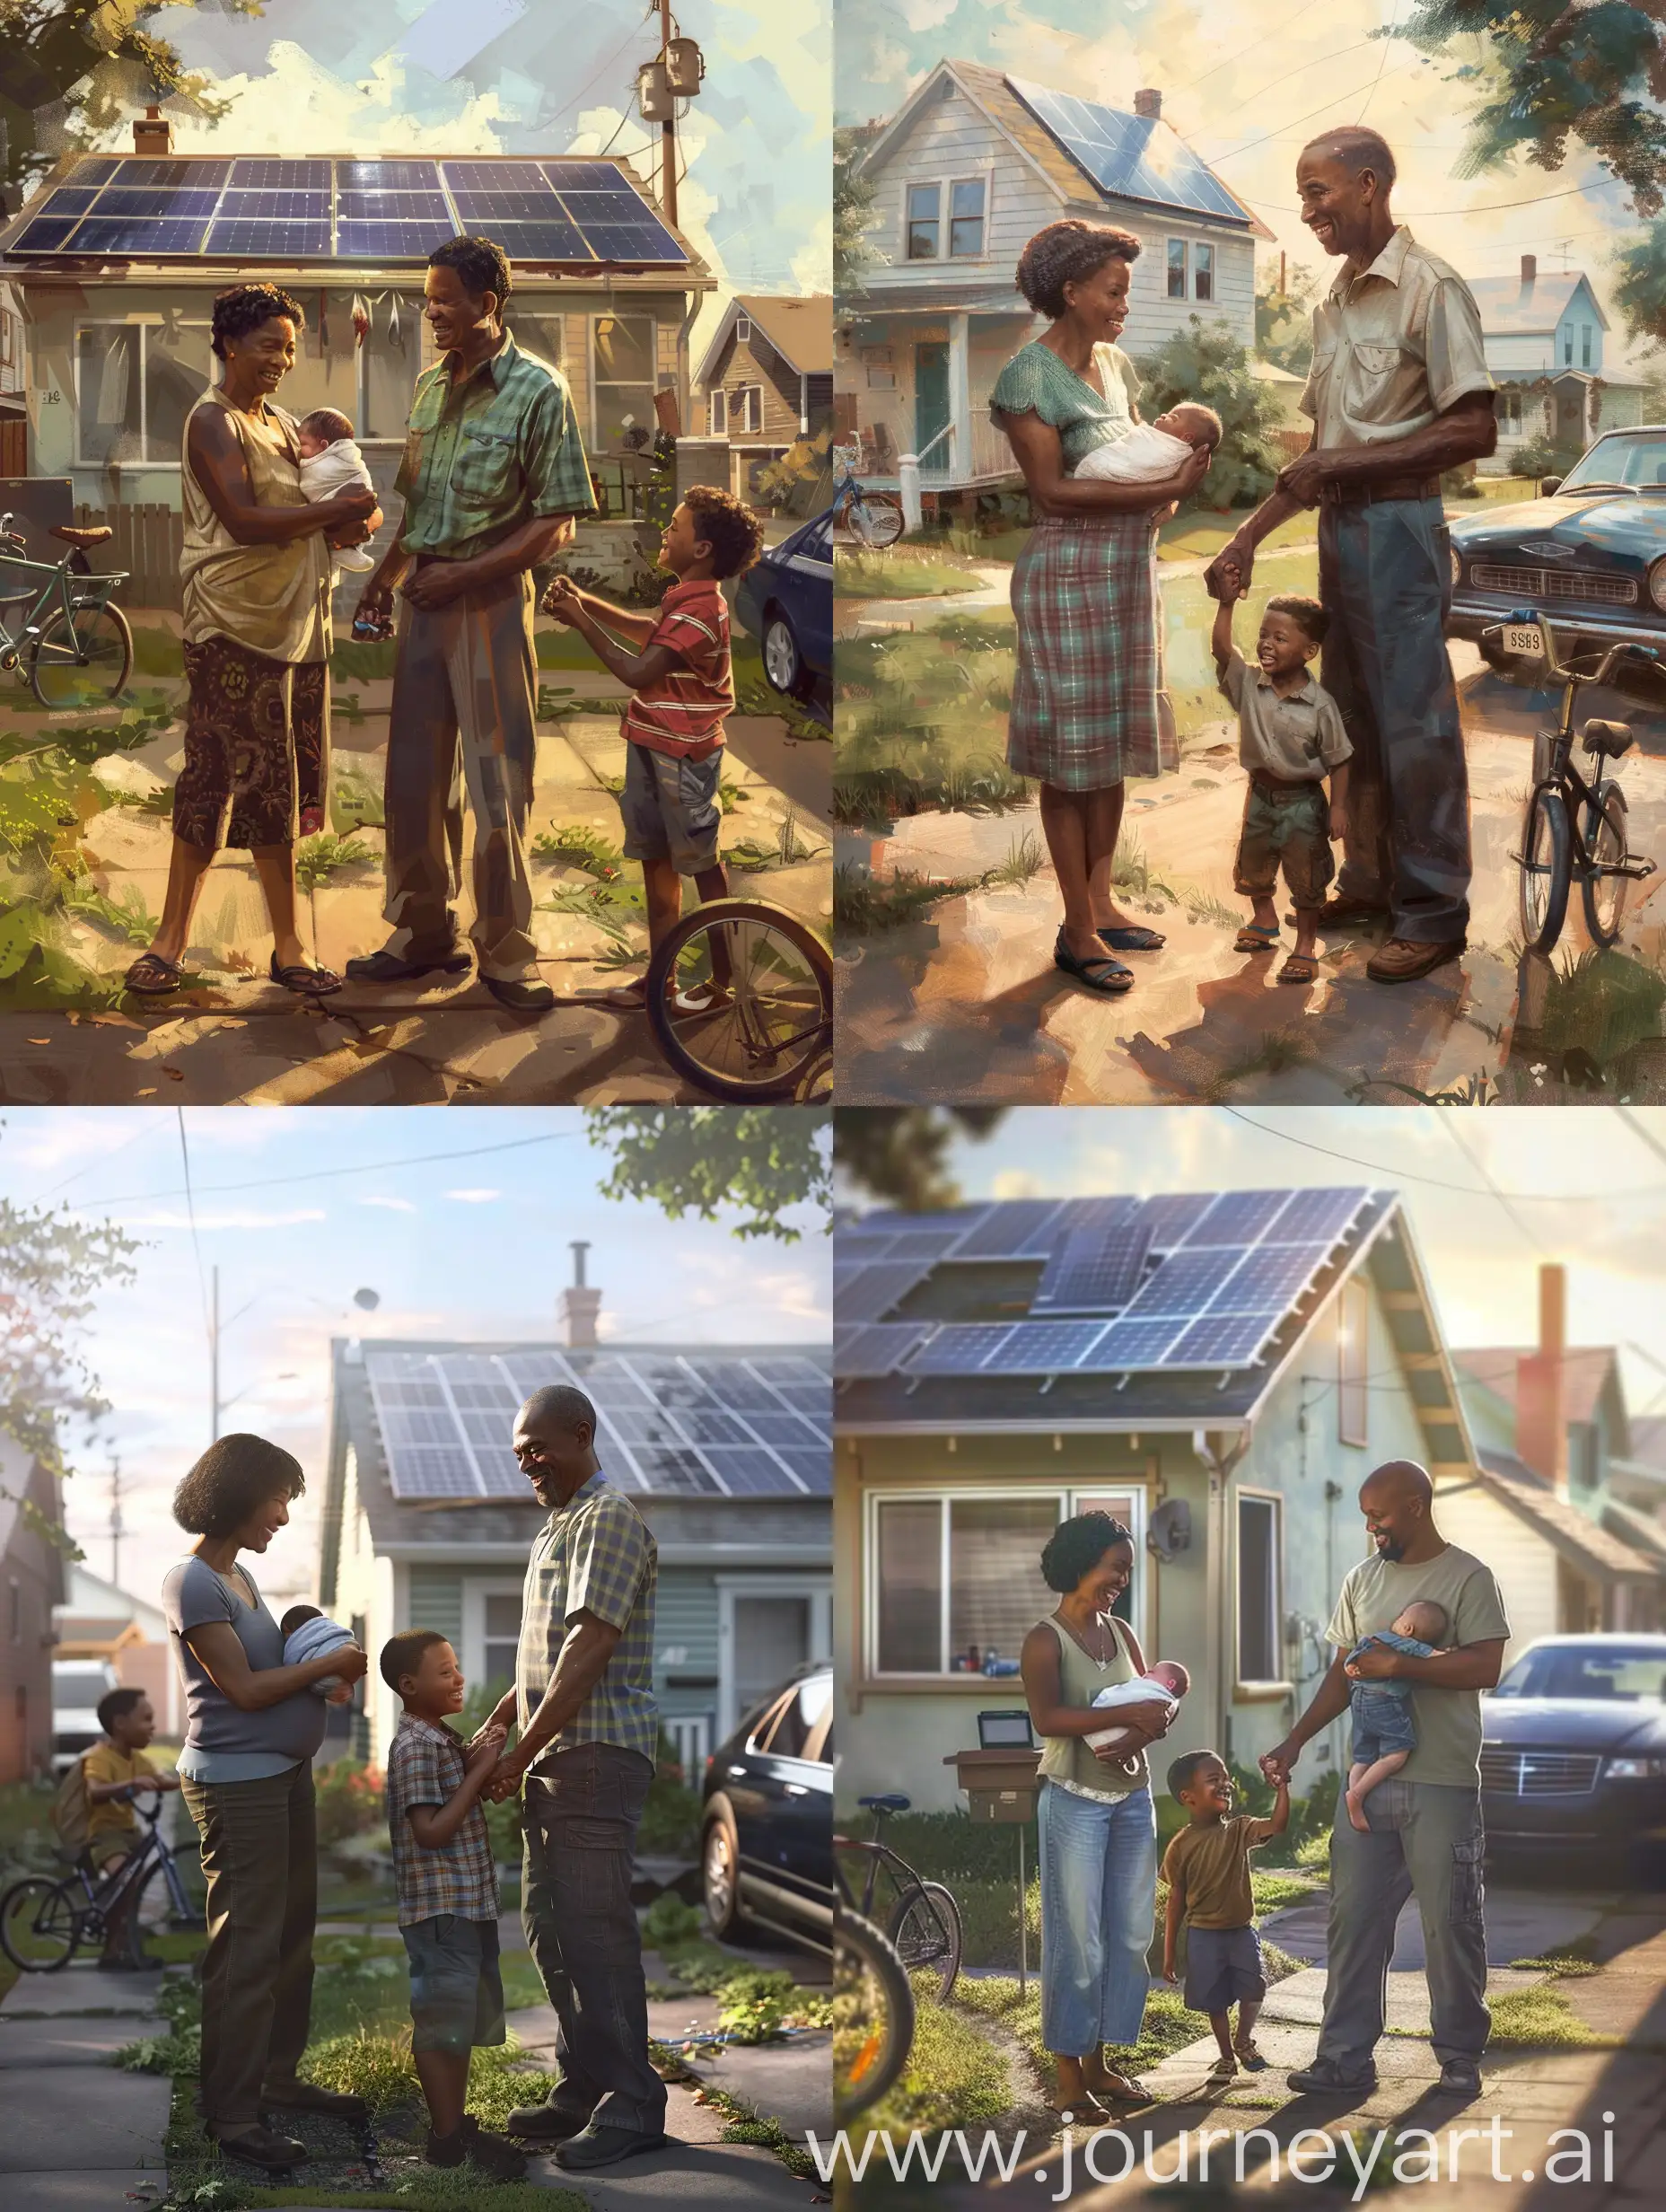 Modern realism style, wide-angle view of a happy African American family outside a small suburban home with solar panels on the roof. The mother, 42, is holding a baby a few months old. The father, 53, is holding the hand of their 8-year-old son. It's midday with bright sunlight shining down on the scene. The family is dressed in casual clothing. The yard features a bike and a dark blue sedan. Other houses are faded in the background. --s 0 --v 6.0 --style raw